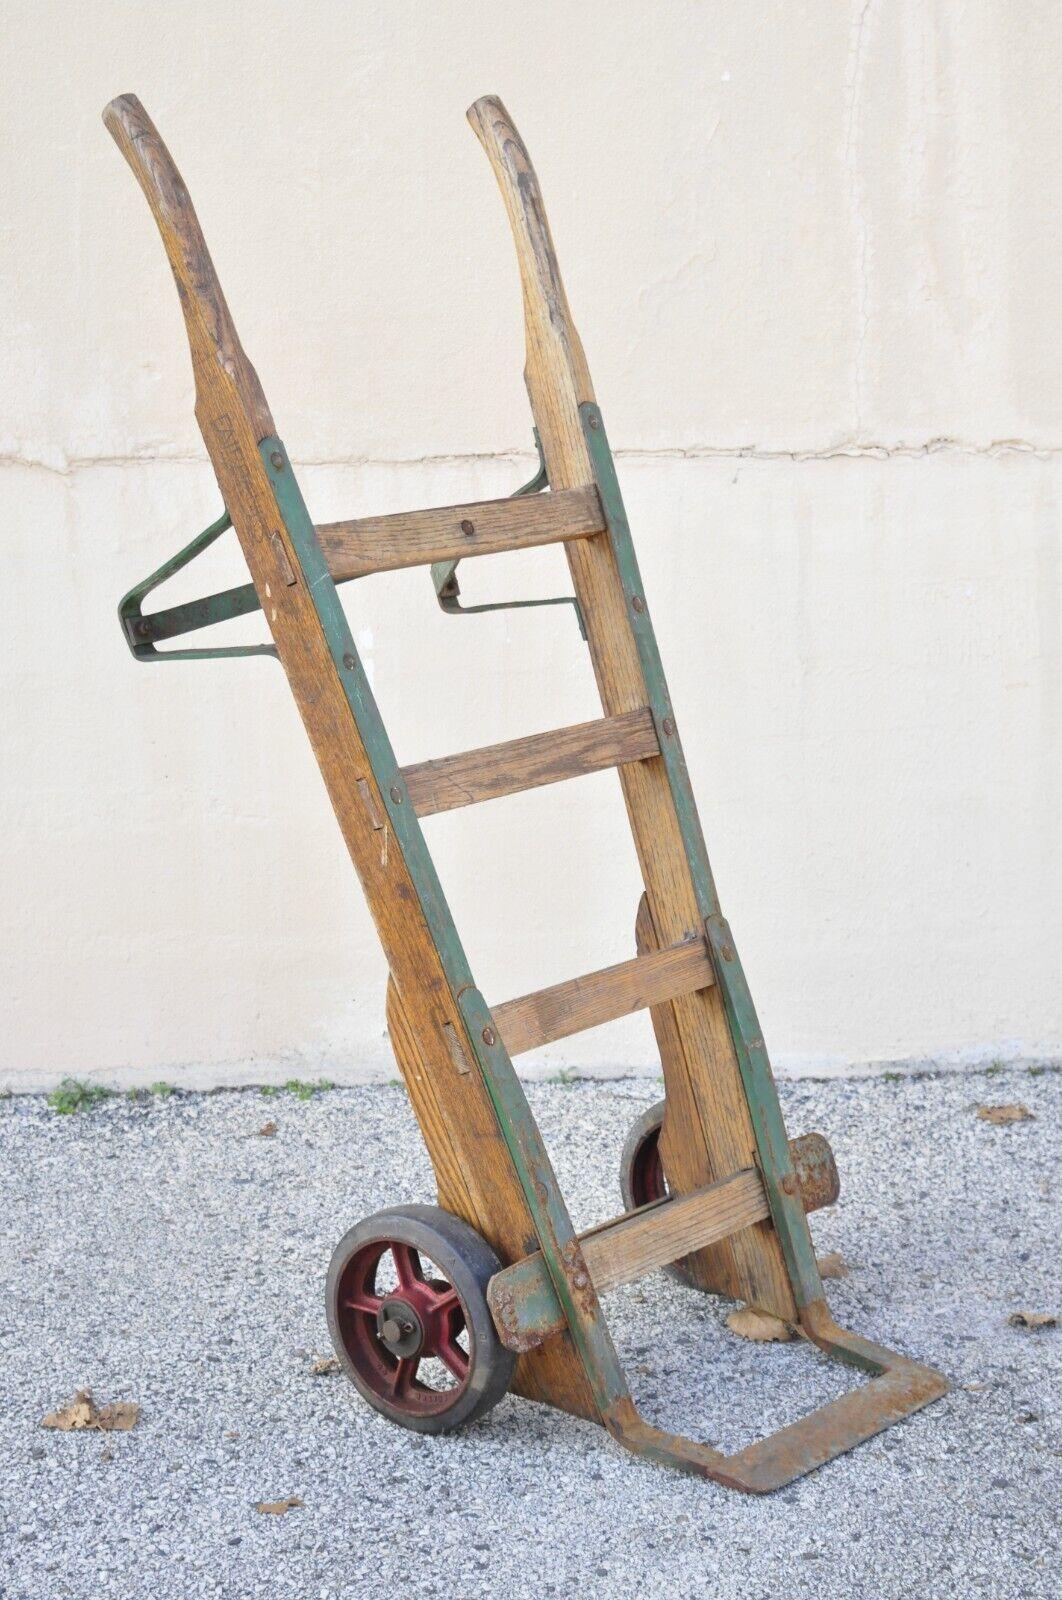 Antique American Industrial oak wood and metal hand cart hand truck dolly. Item features green painted metal frame, solid wood construction, beautiful wood grain, original stamp, quality American craftsmanship. Circa Mid 20th Century. Measurements: